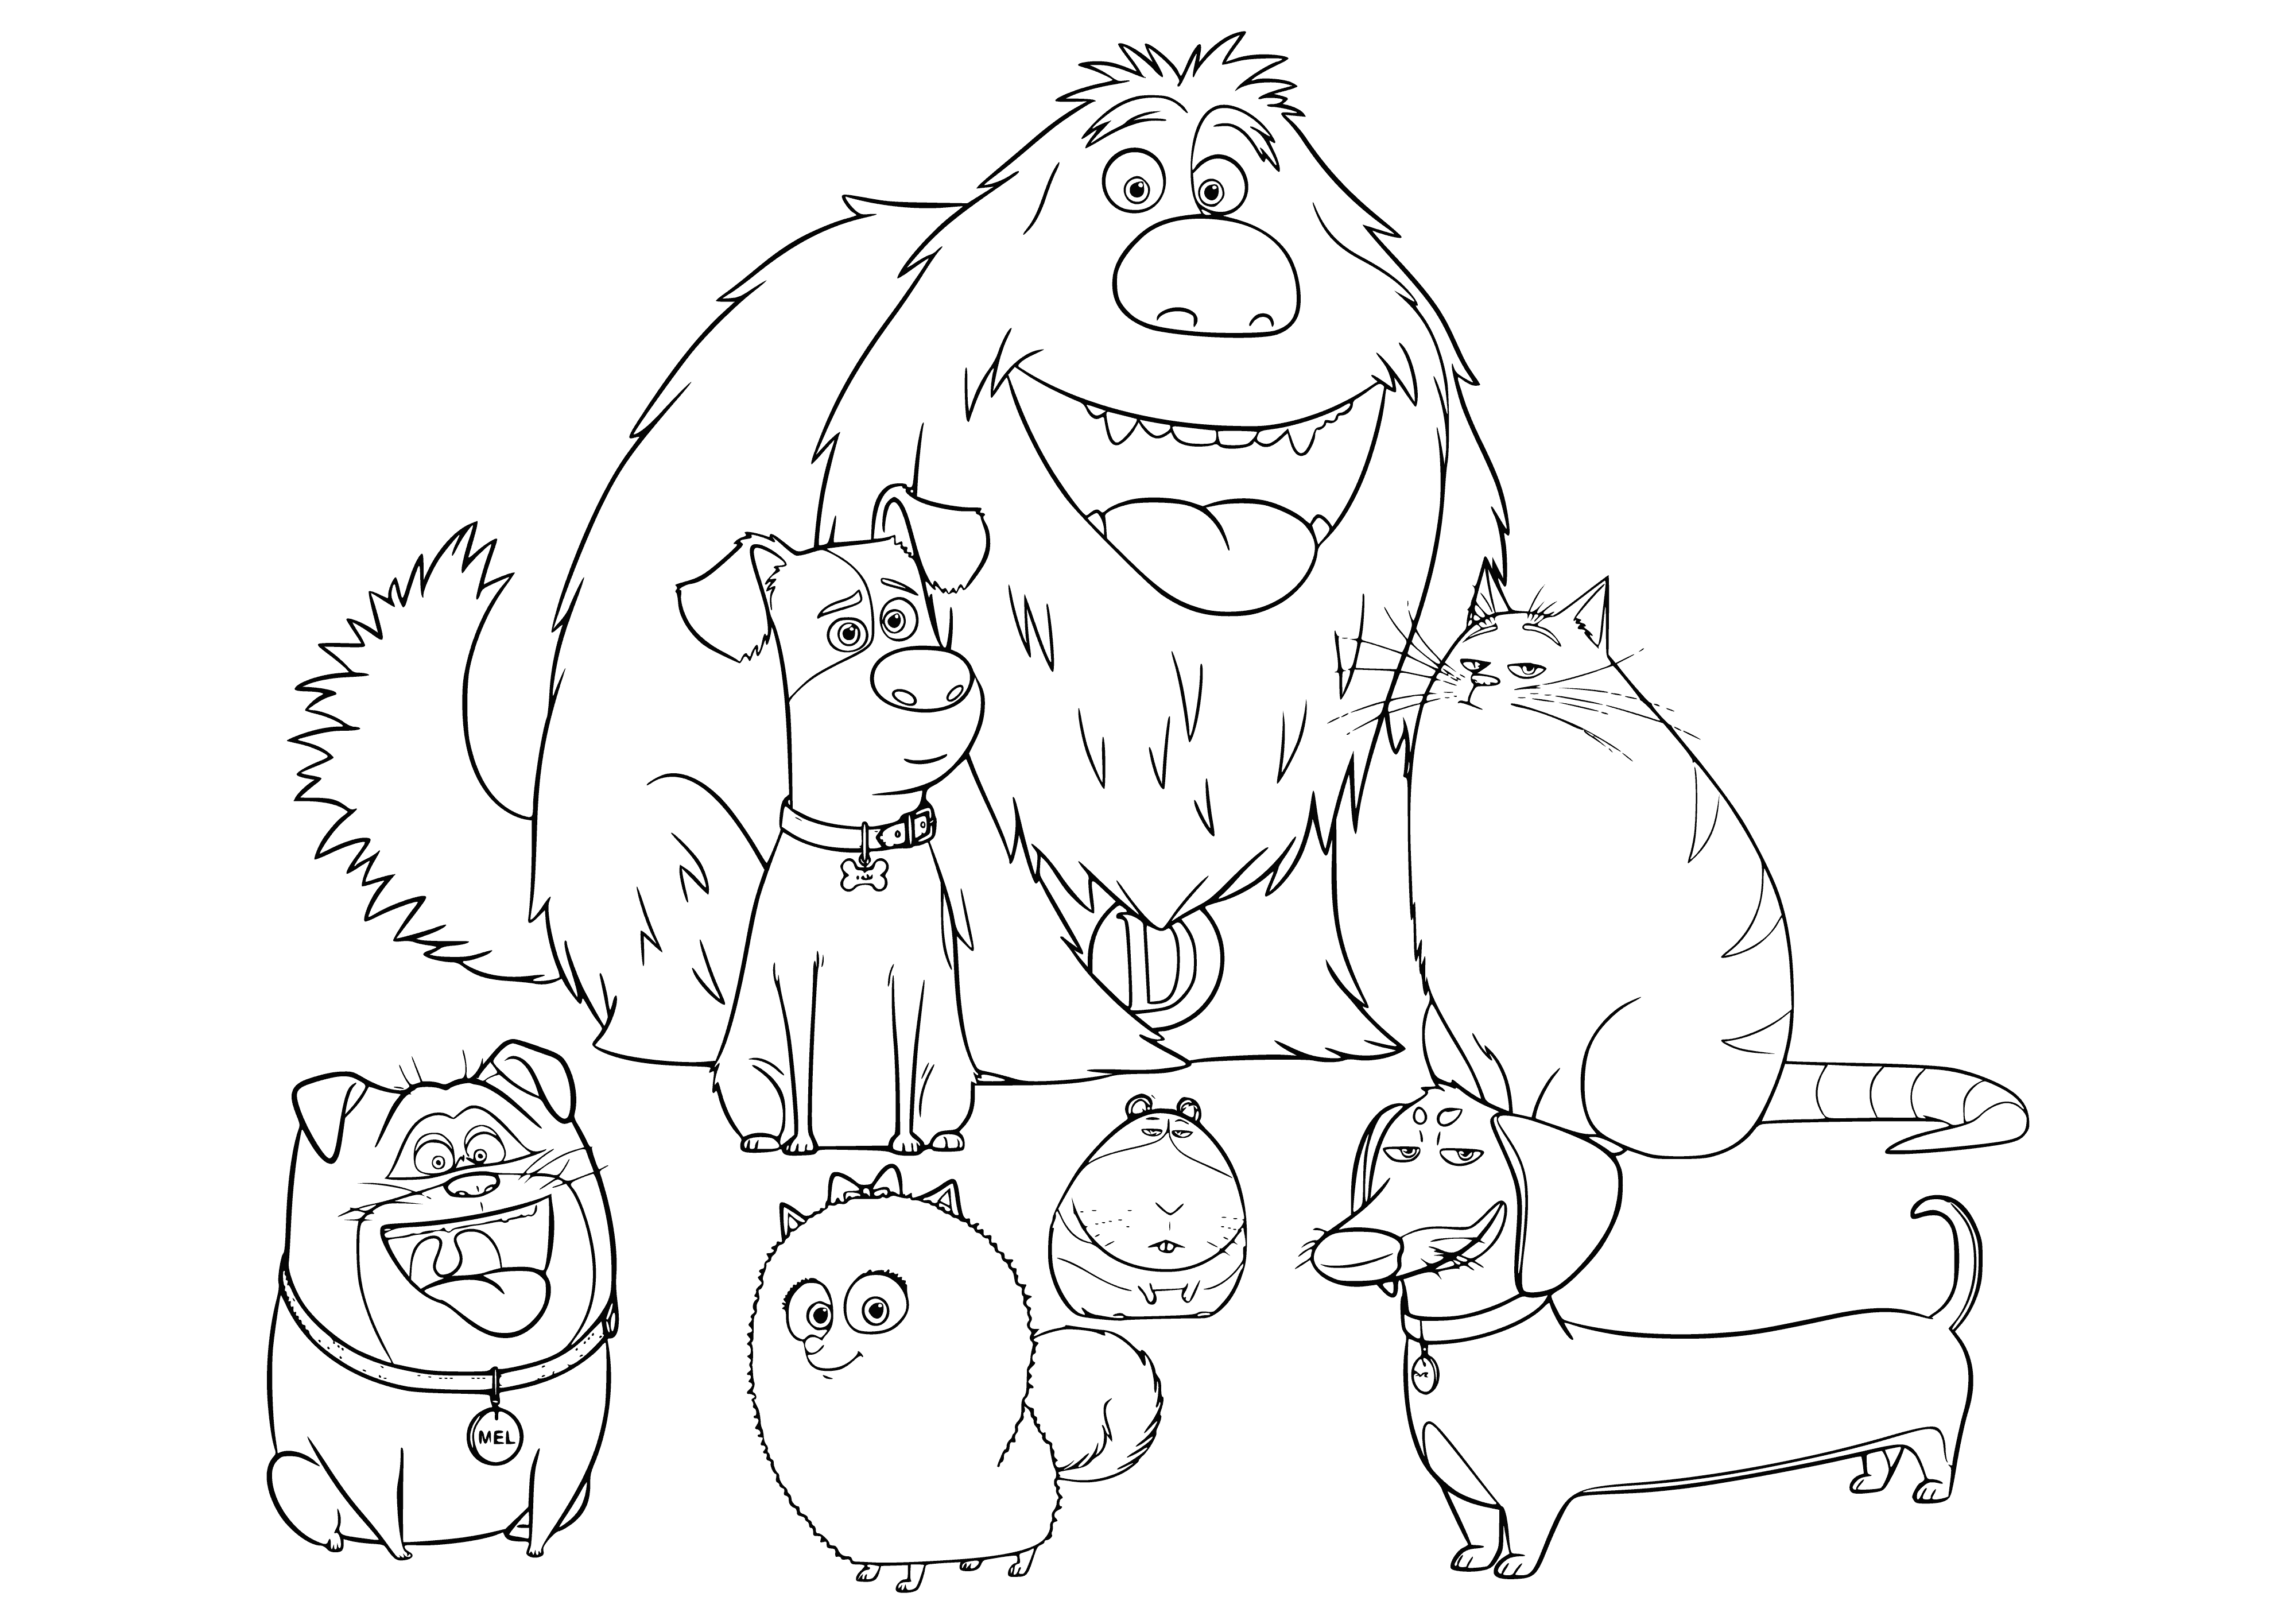 The Secret Life of Pets coloring page